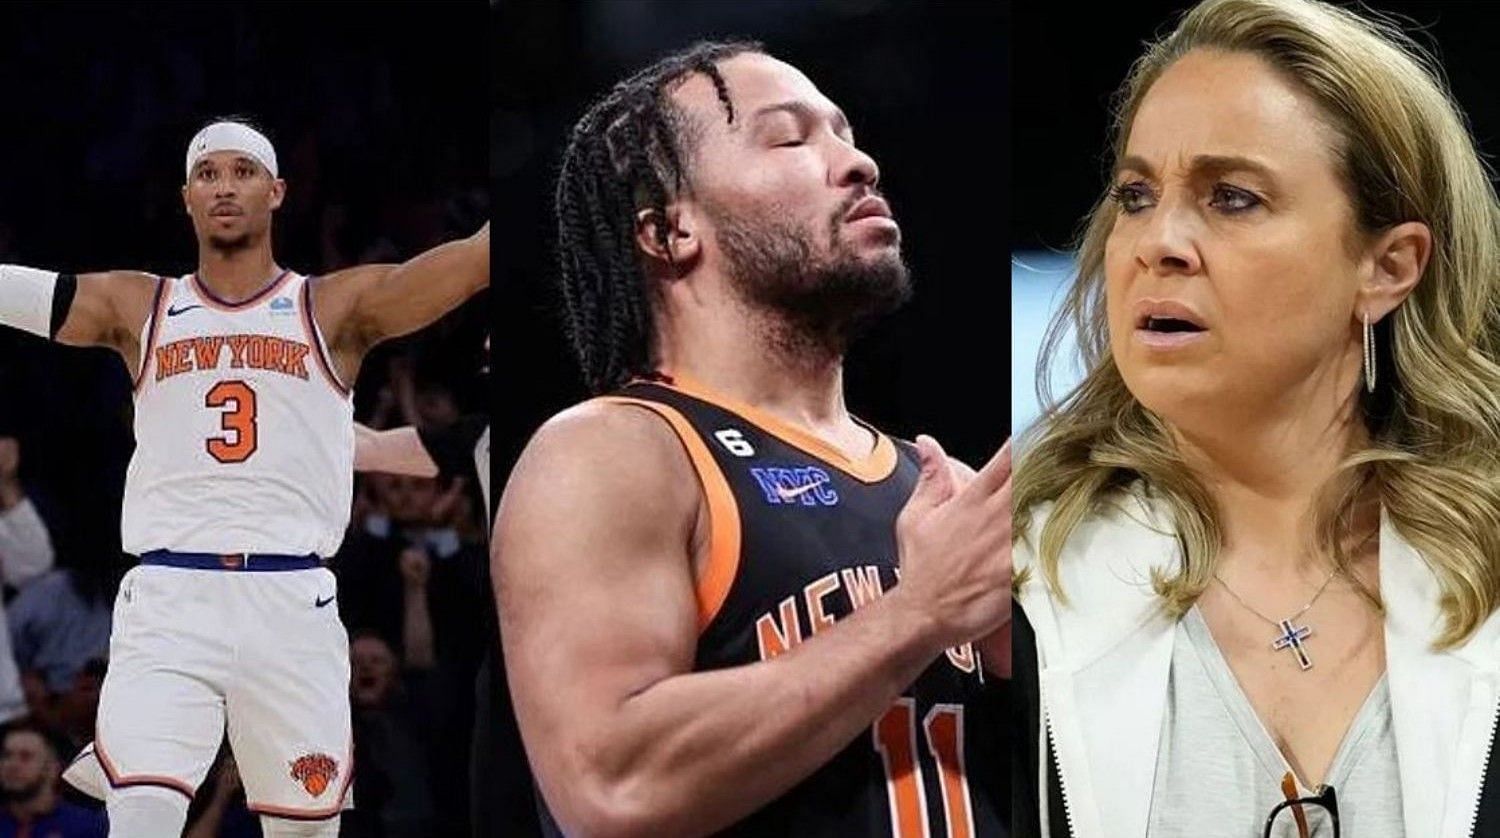 New York Knicks guard John Hart (L) defended teammate Jalen Brunson (C) from comments made by champion WNBA coach Becky Hammon (R) earlier this week.